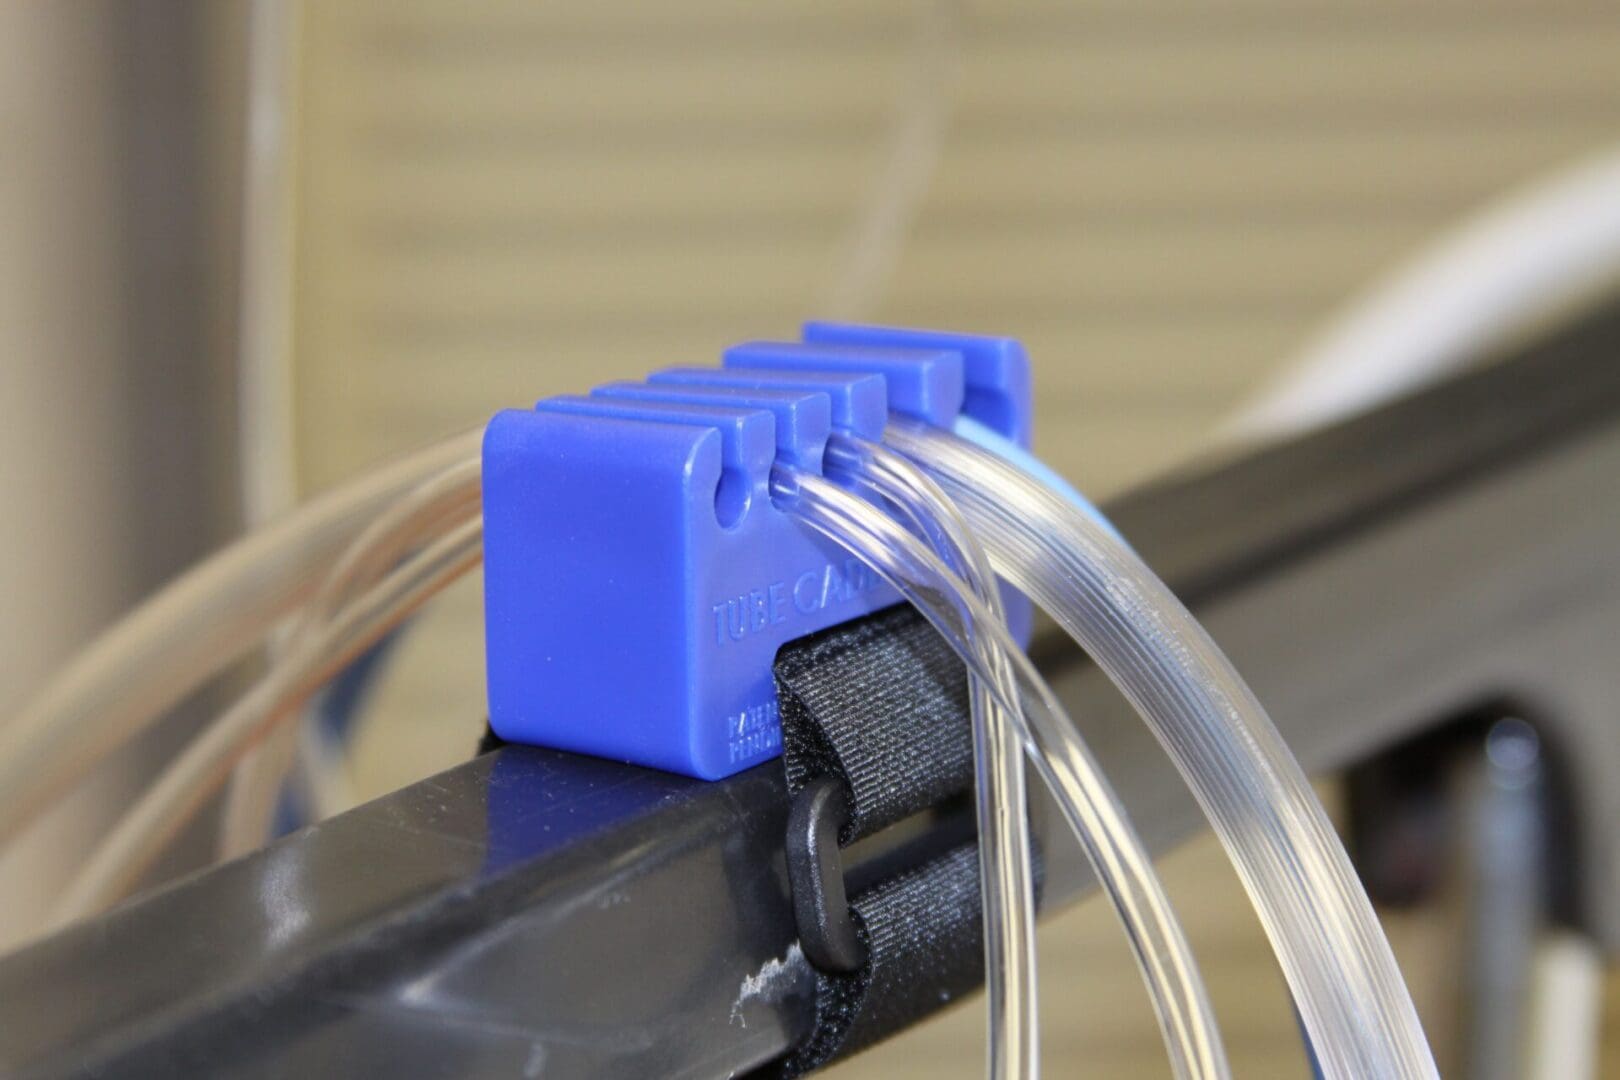 A blue plastic object is attached to some wires.